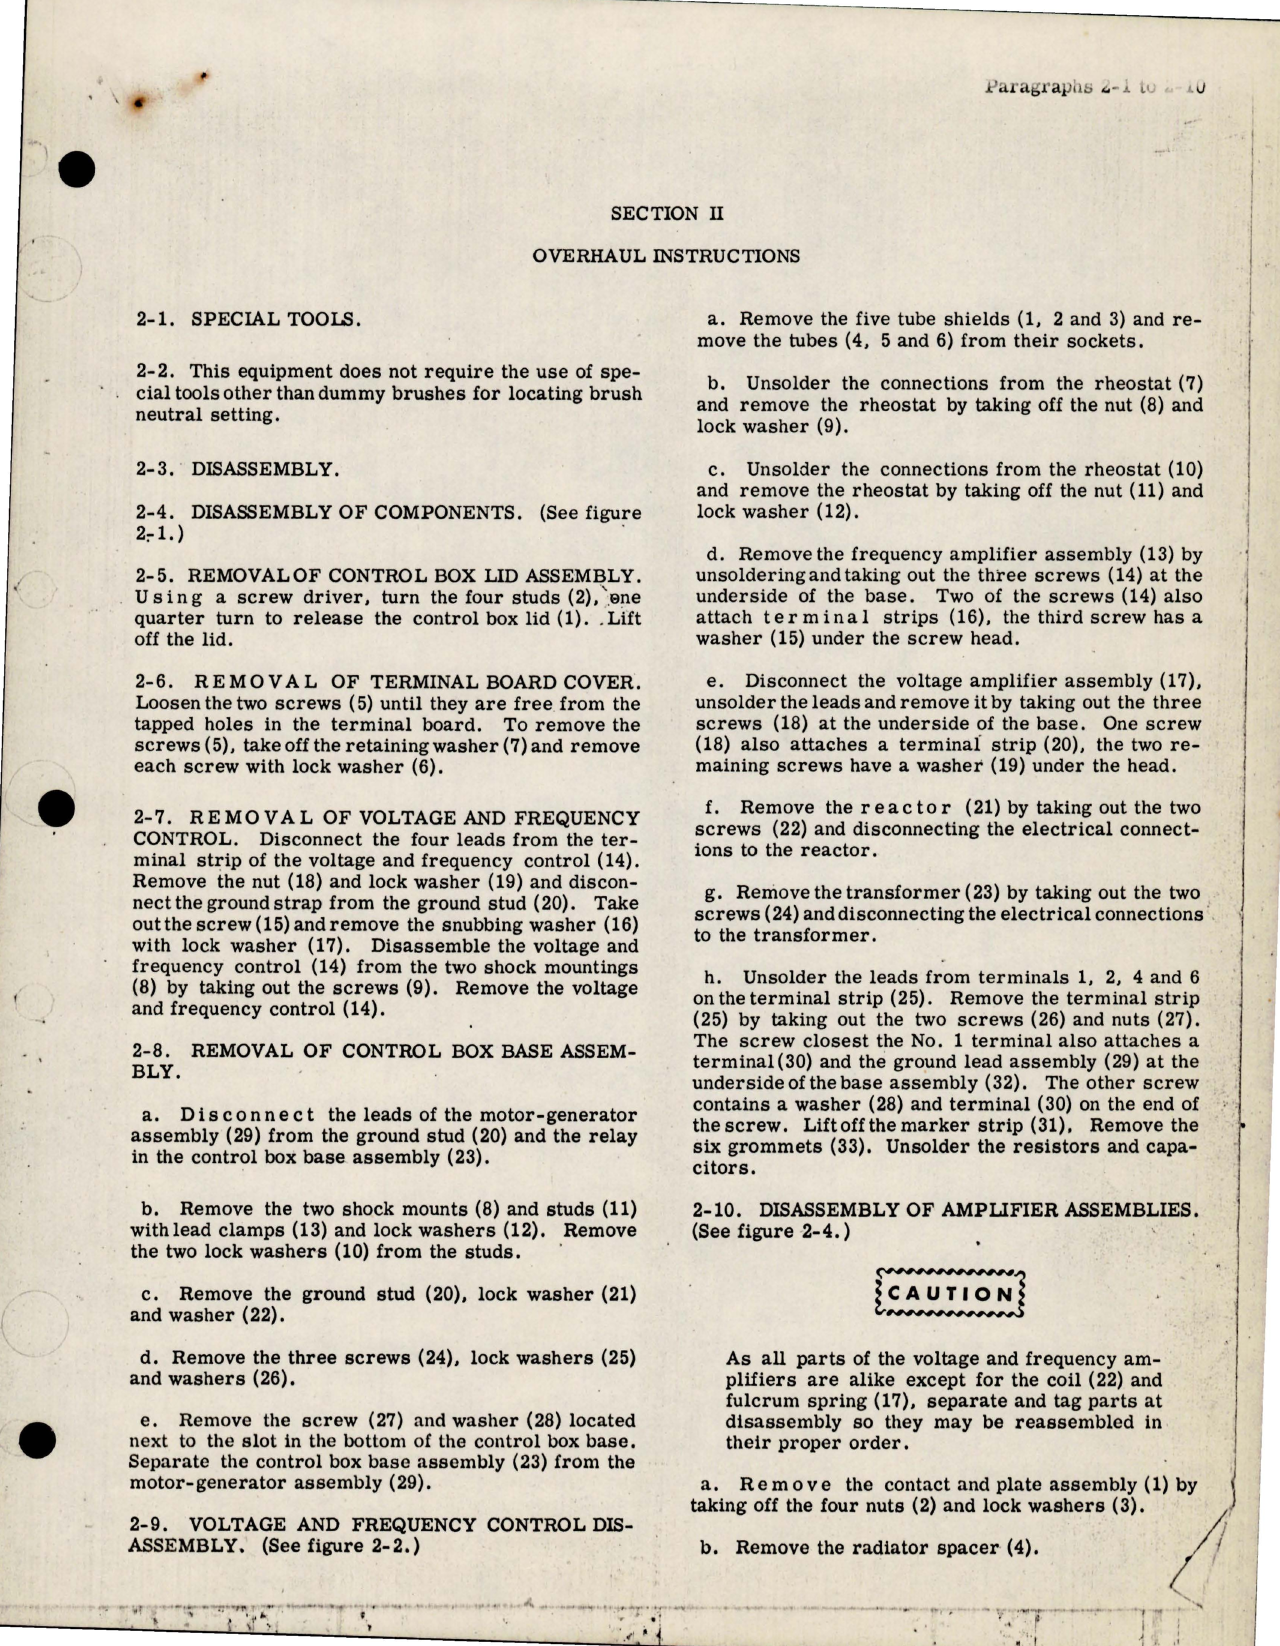 Sample page 5 from AirCorps Library document: Overhaul Instructions for Inverter AN 3514-1 - Parts SE-6-1 and SE-6-2 